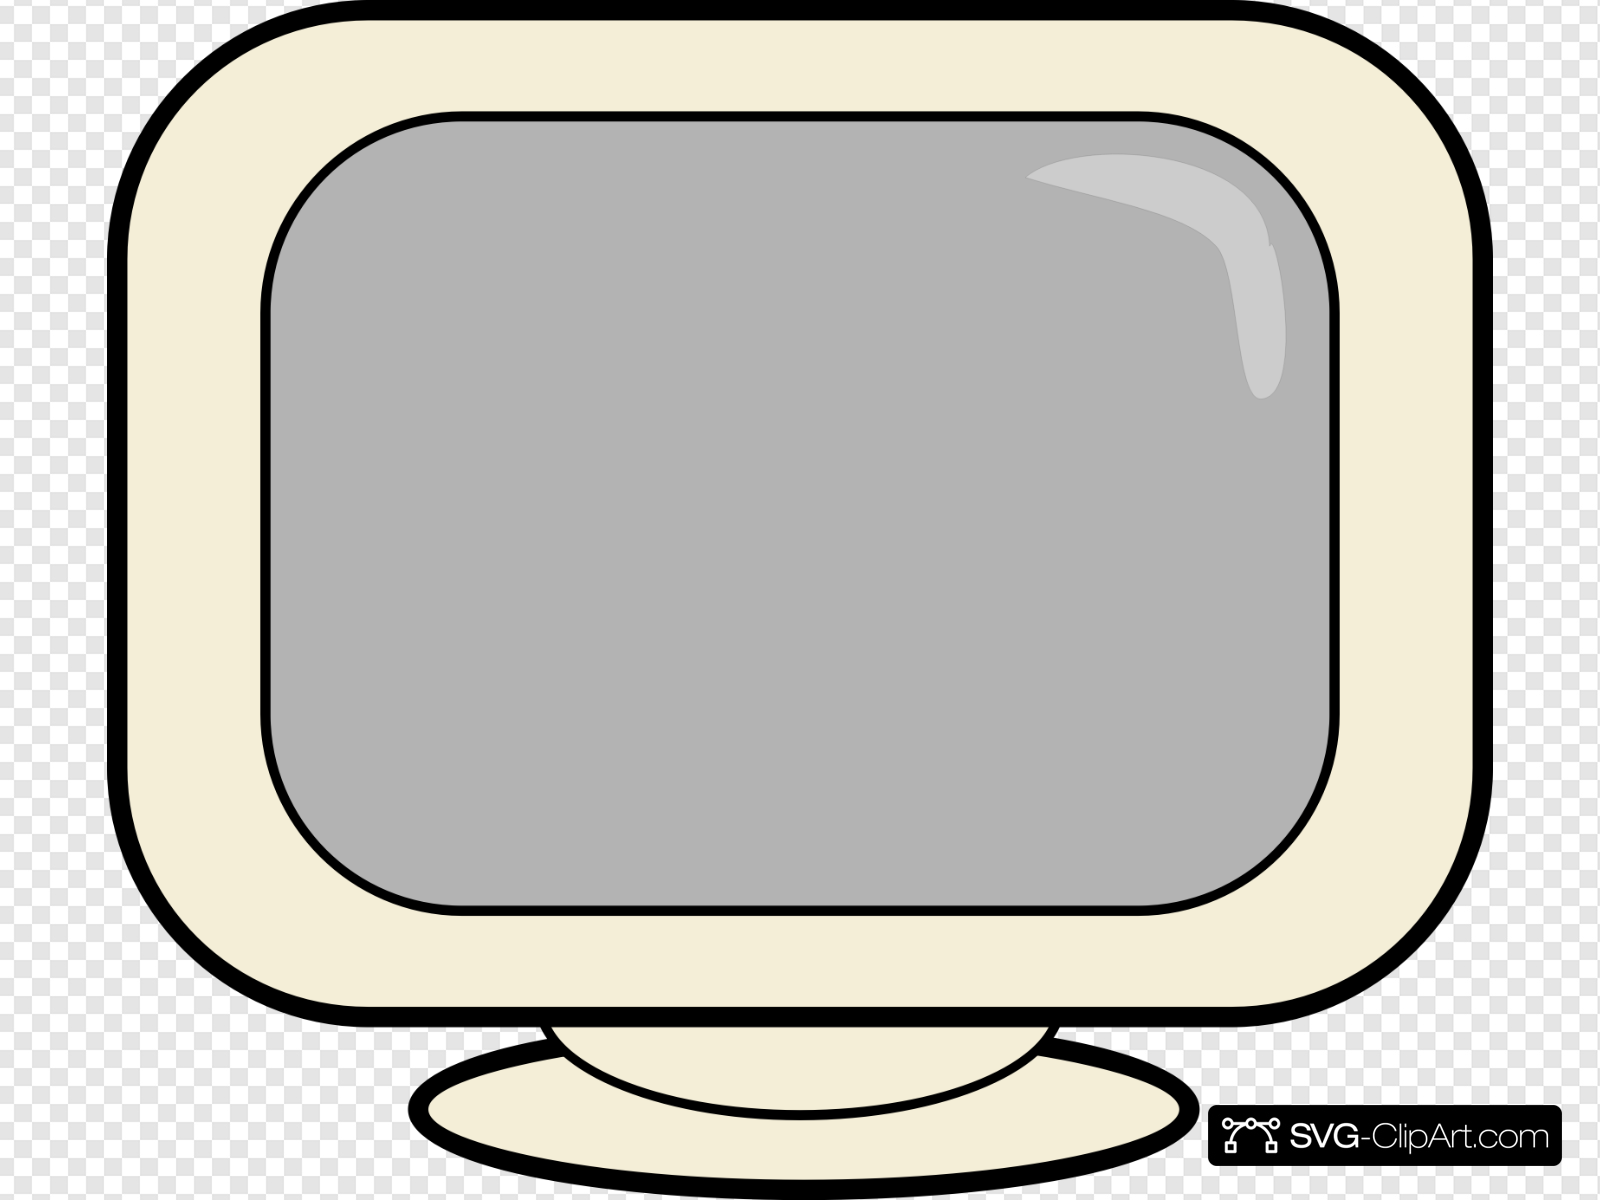 Blank Computer Screen Clip art, Icon and SVG